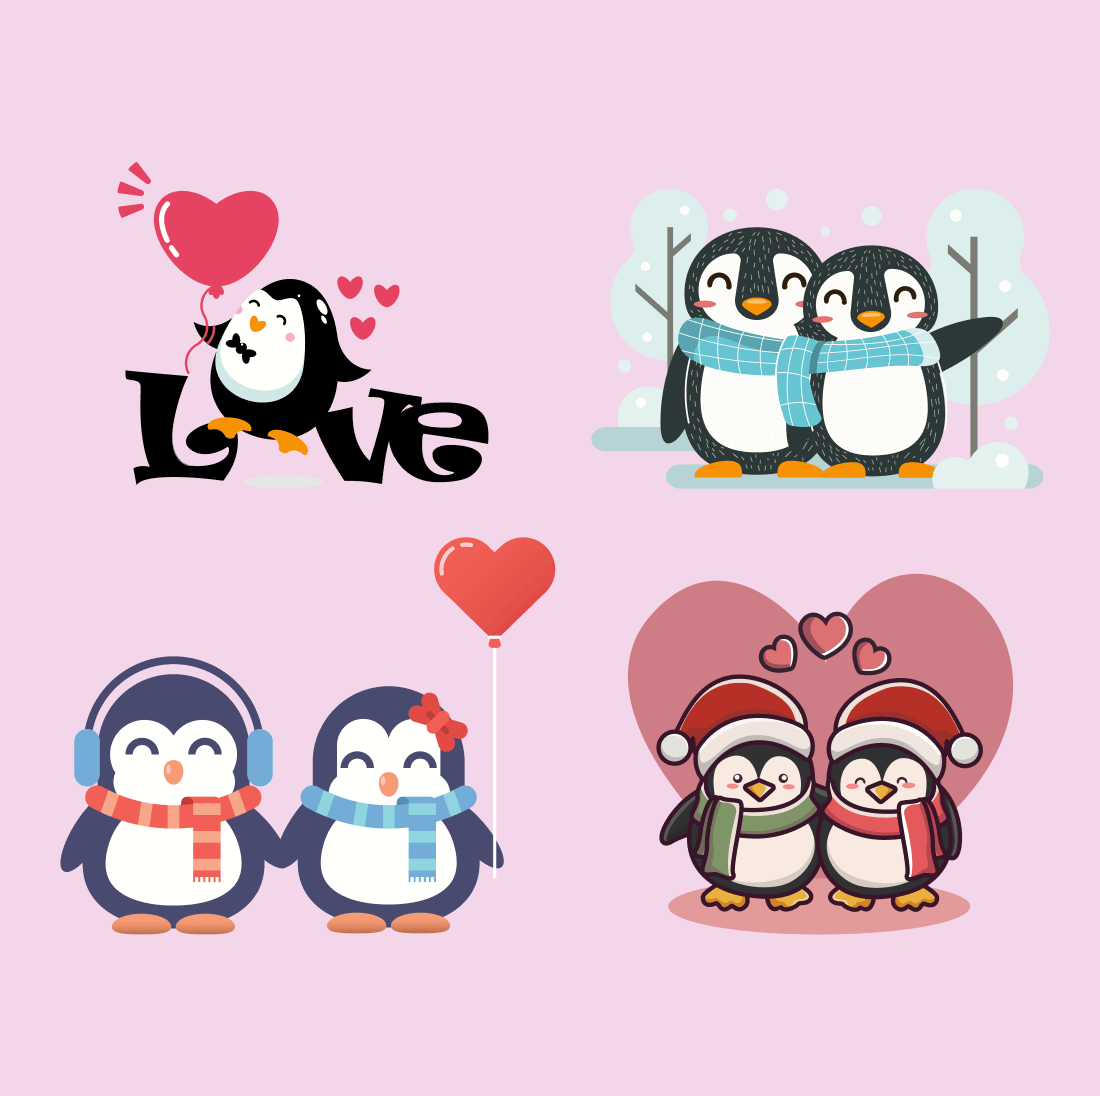 Couples of penguins who love each other.